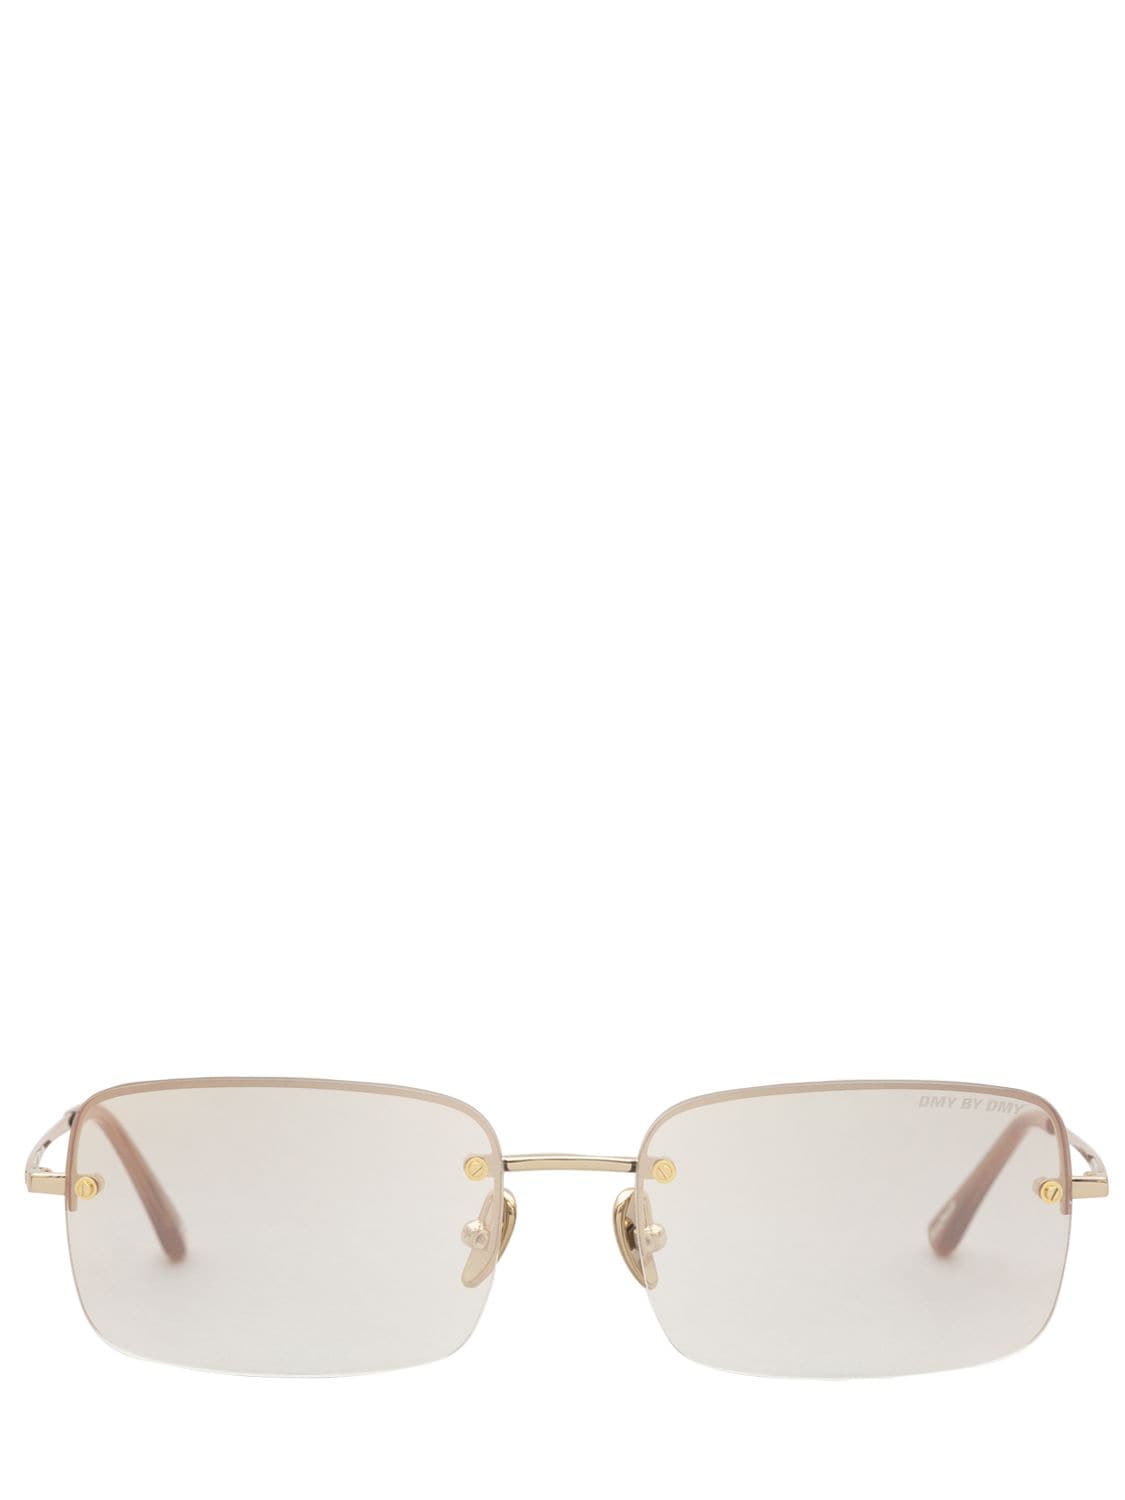 Dmy By Dmy Jen Squared Stainless Steel Sunglasses In Gold,mirror